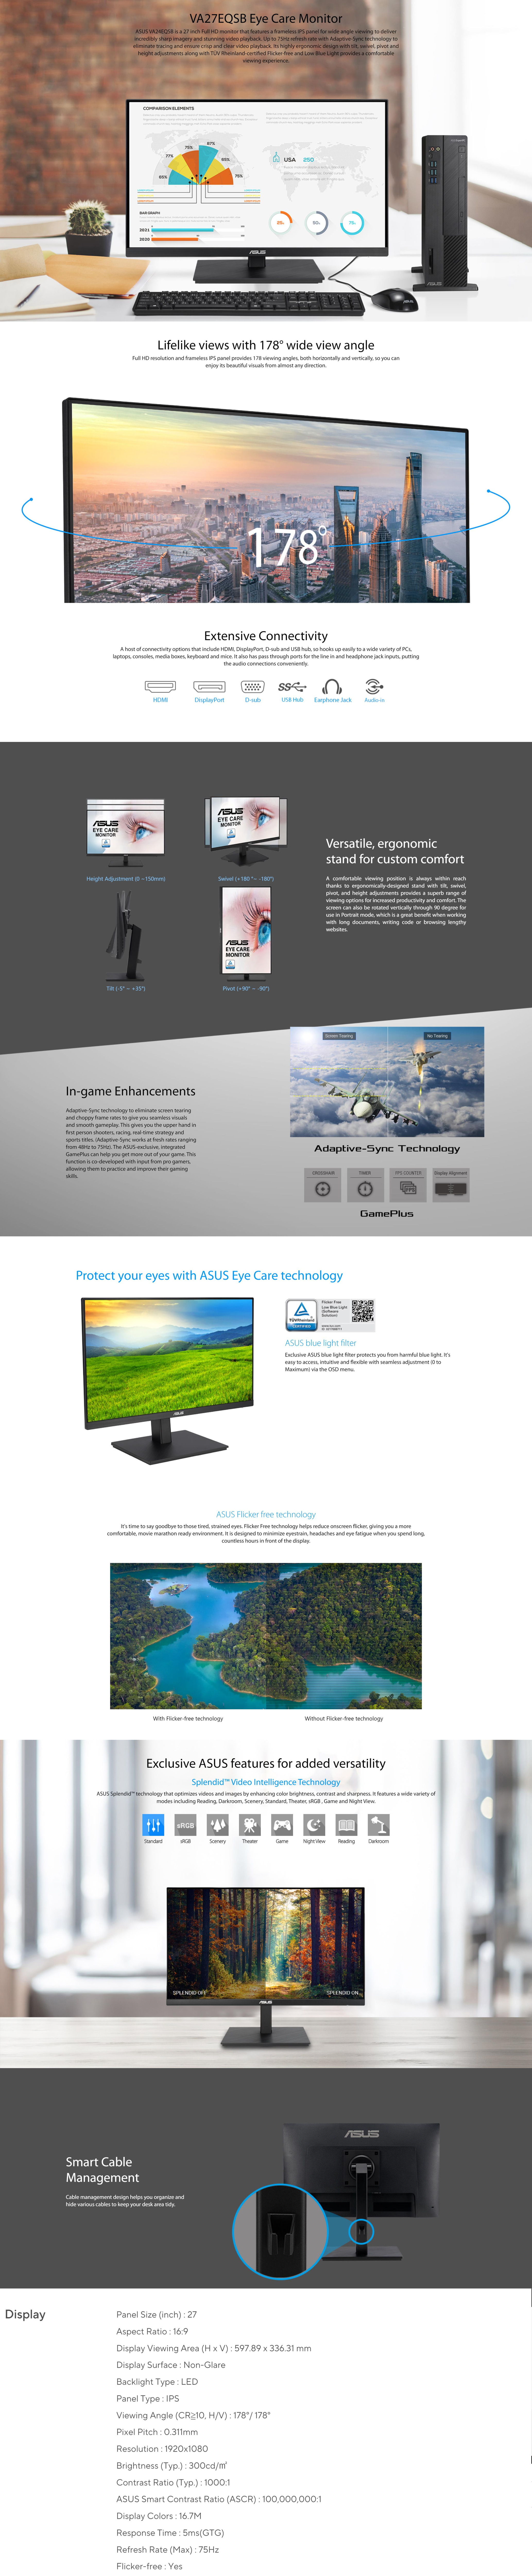 A large marketing image providing additional information about the product ASUS VA27EQSB 27" FHD 75Hz IPS Monitor - Additional alt info not provided